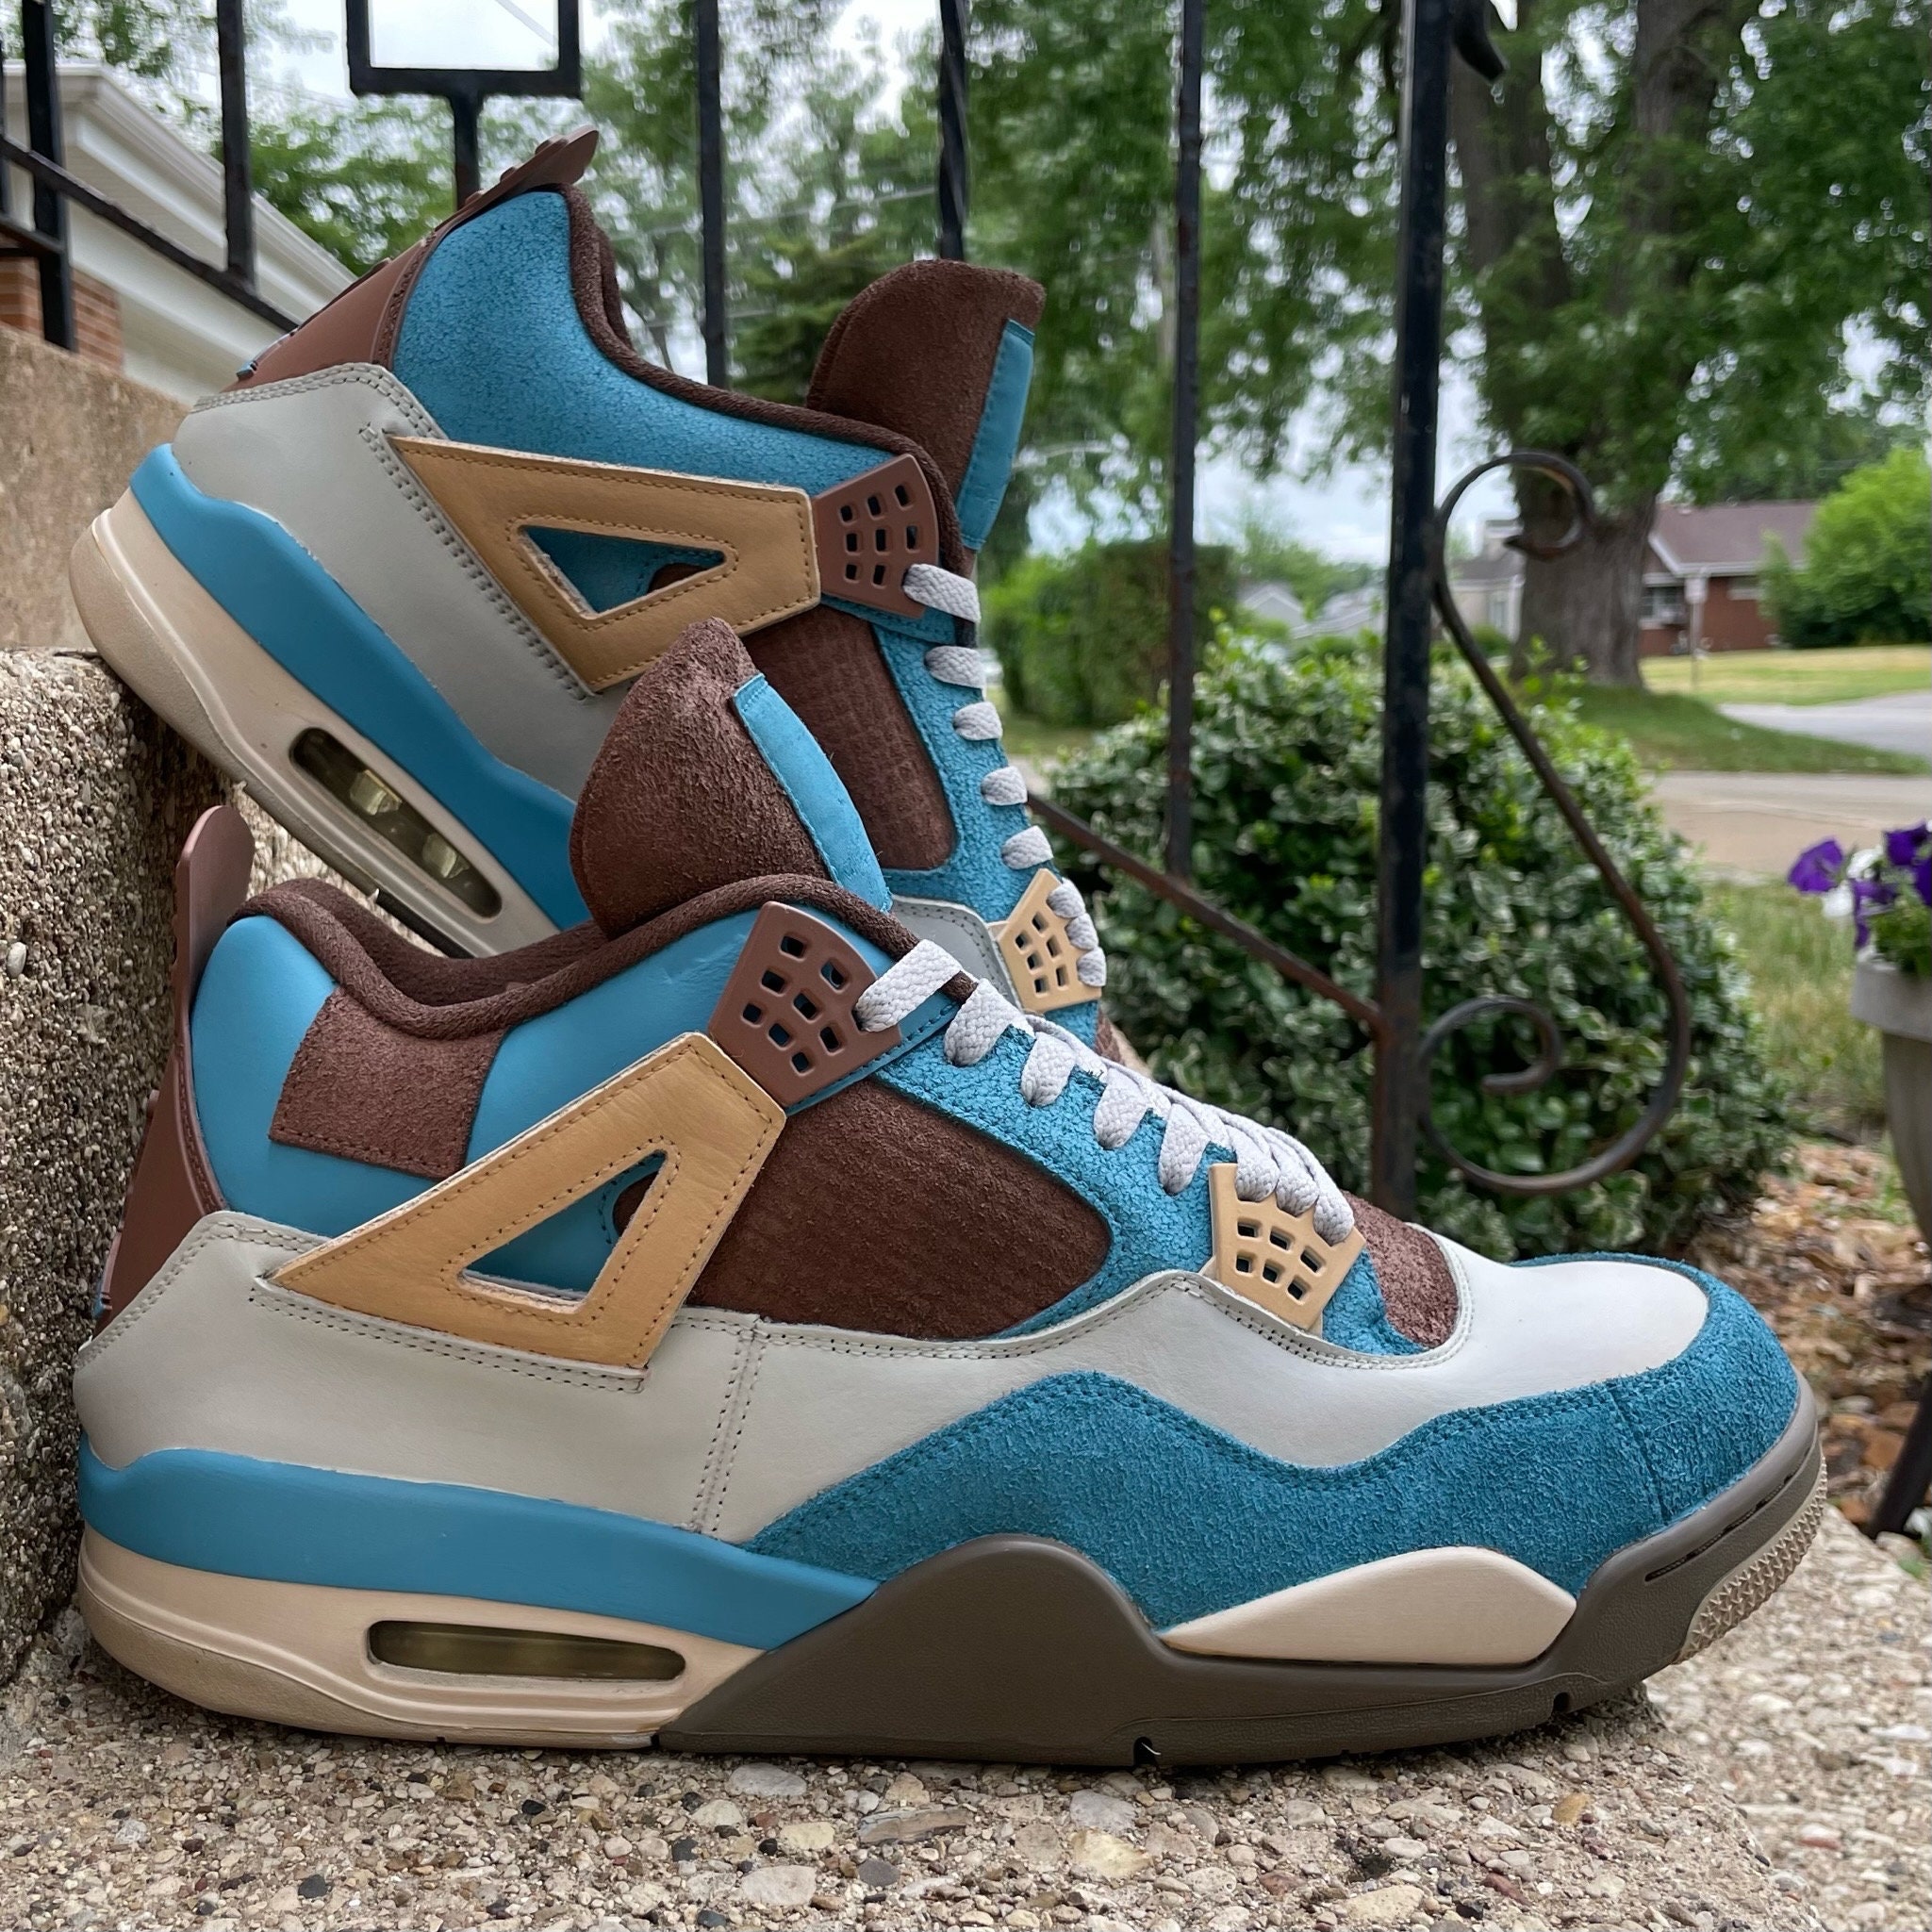 Custom Blue and Brown Pokémon Themed Jordan 4s made From -  Norway